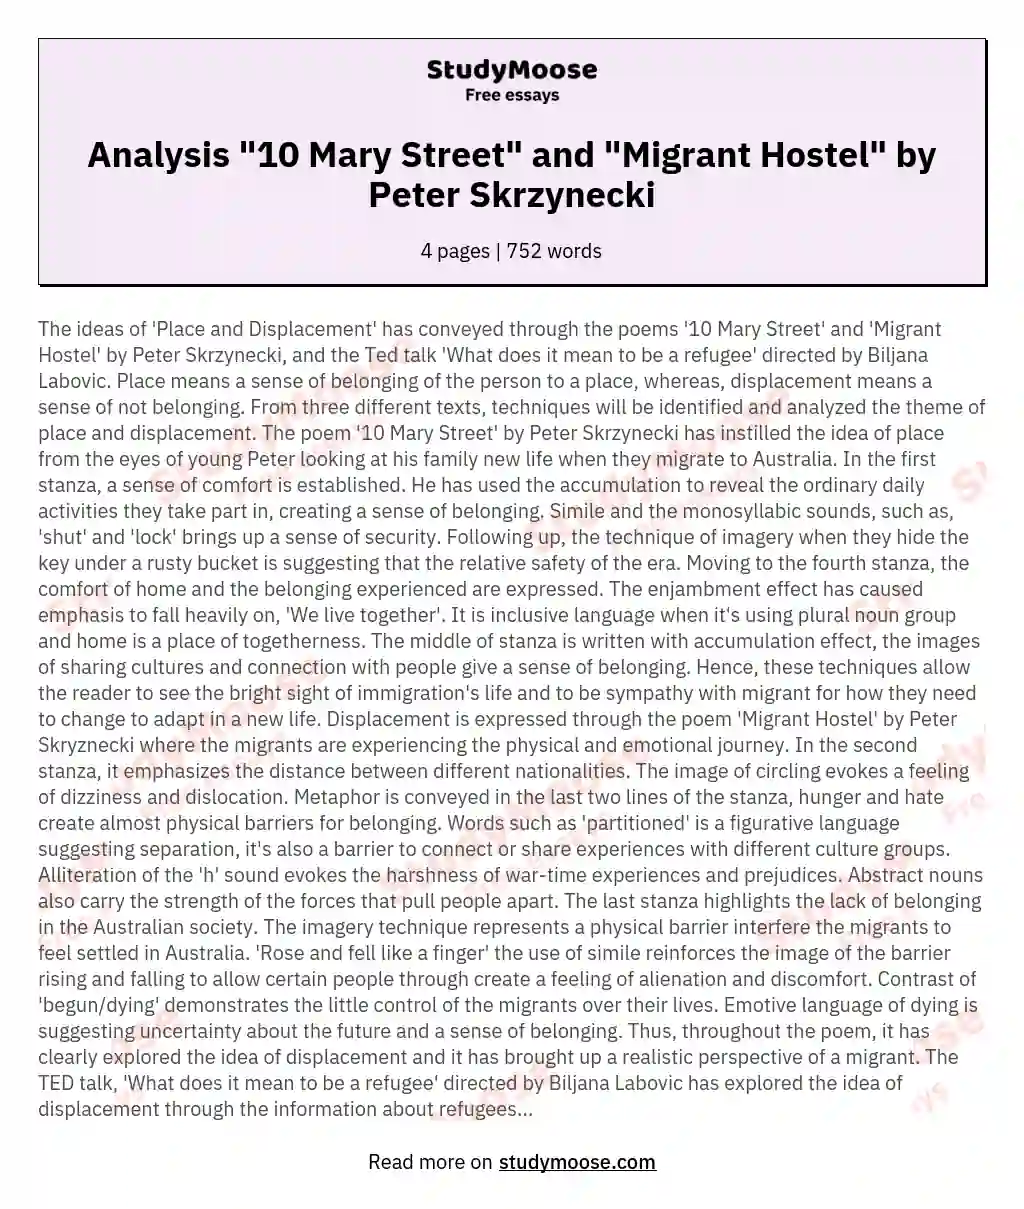 Analysis "10 Mary Street" and "Migrant Hostel" by Peter Skrzynecki